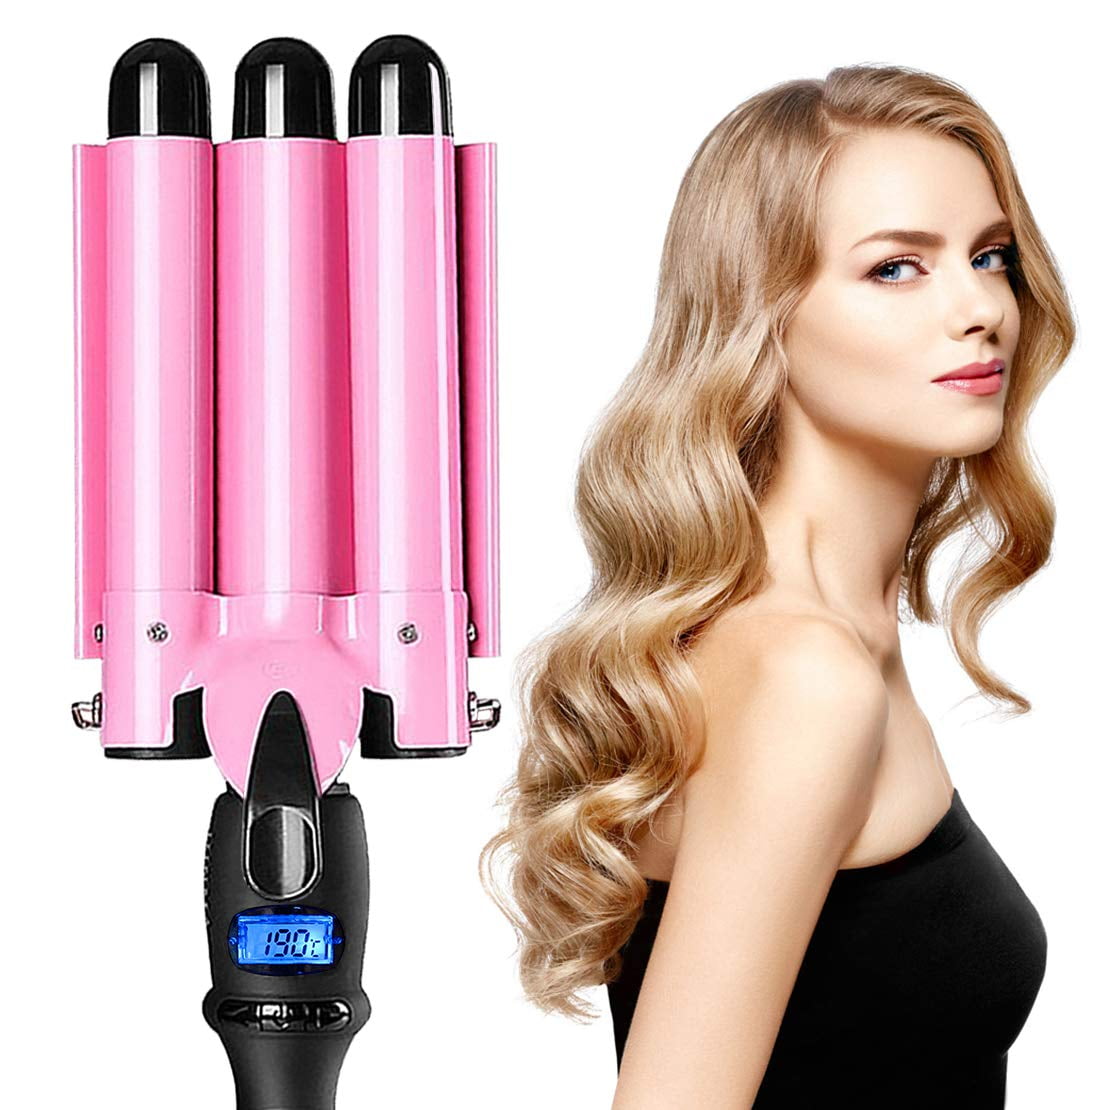 11 Best Curling Wands Tongs: The Best Hair Curling Tools For All Hair Types  Glamour UK | In Hair Iron Wand Hair Curler Roller Set Pro Barrel |  